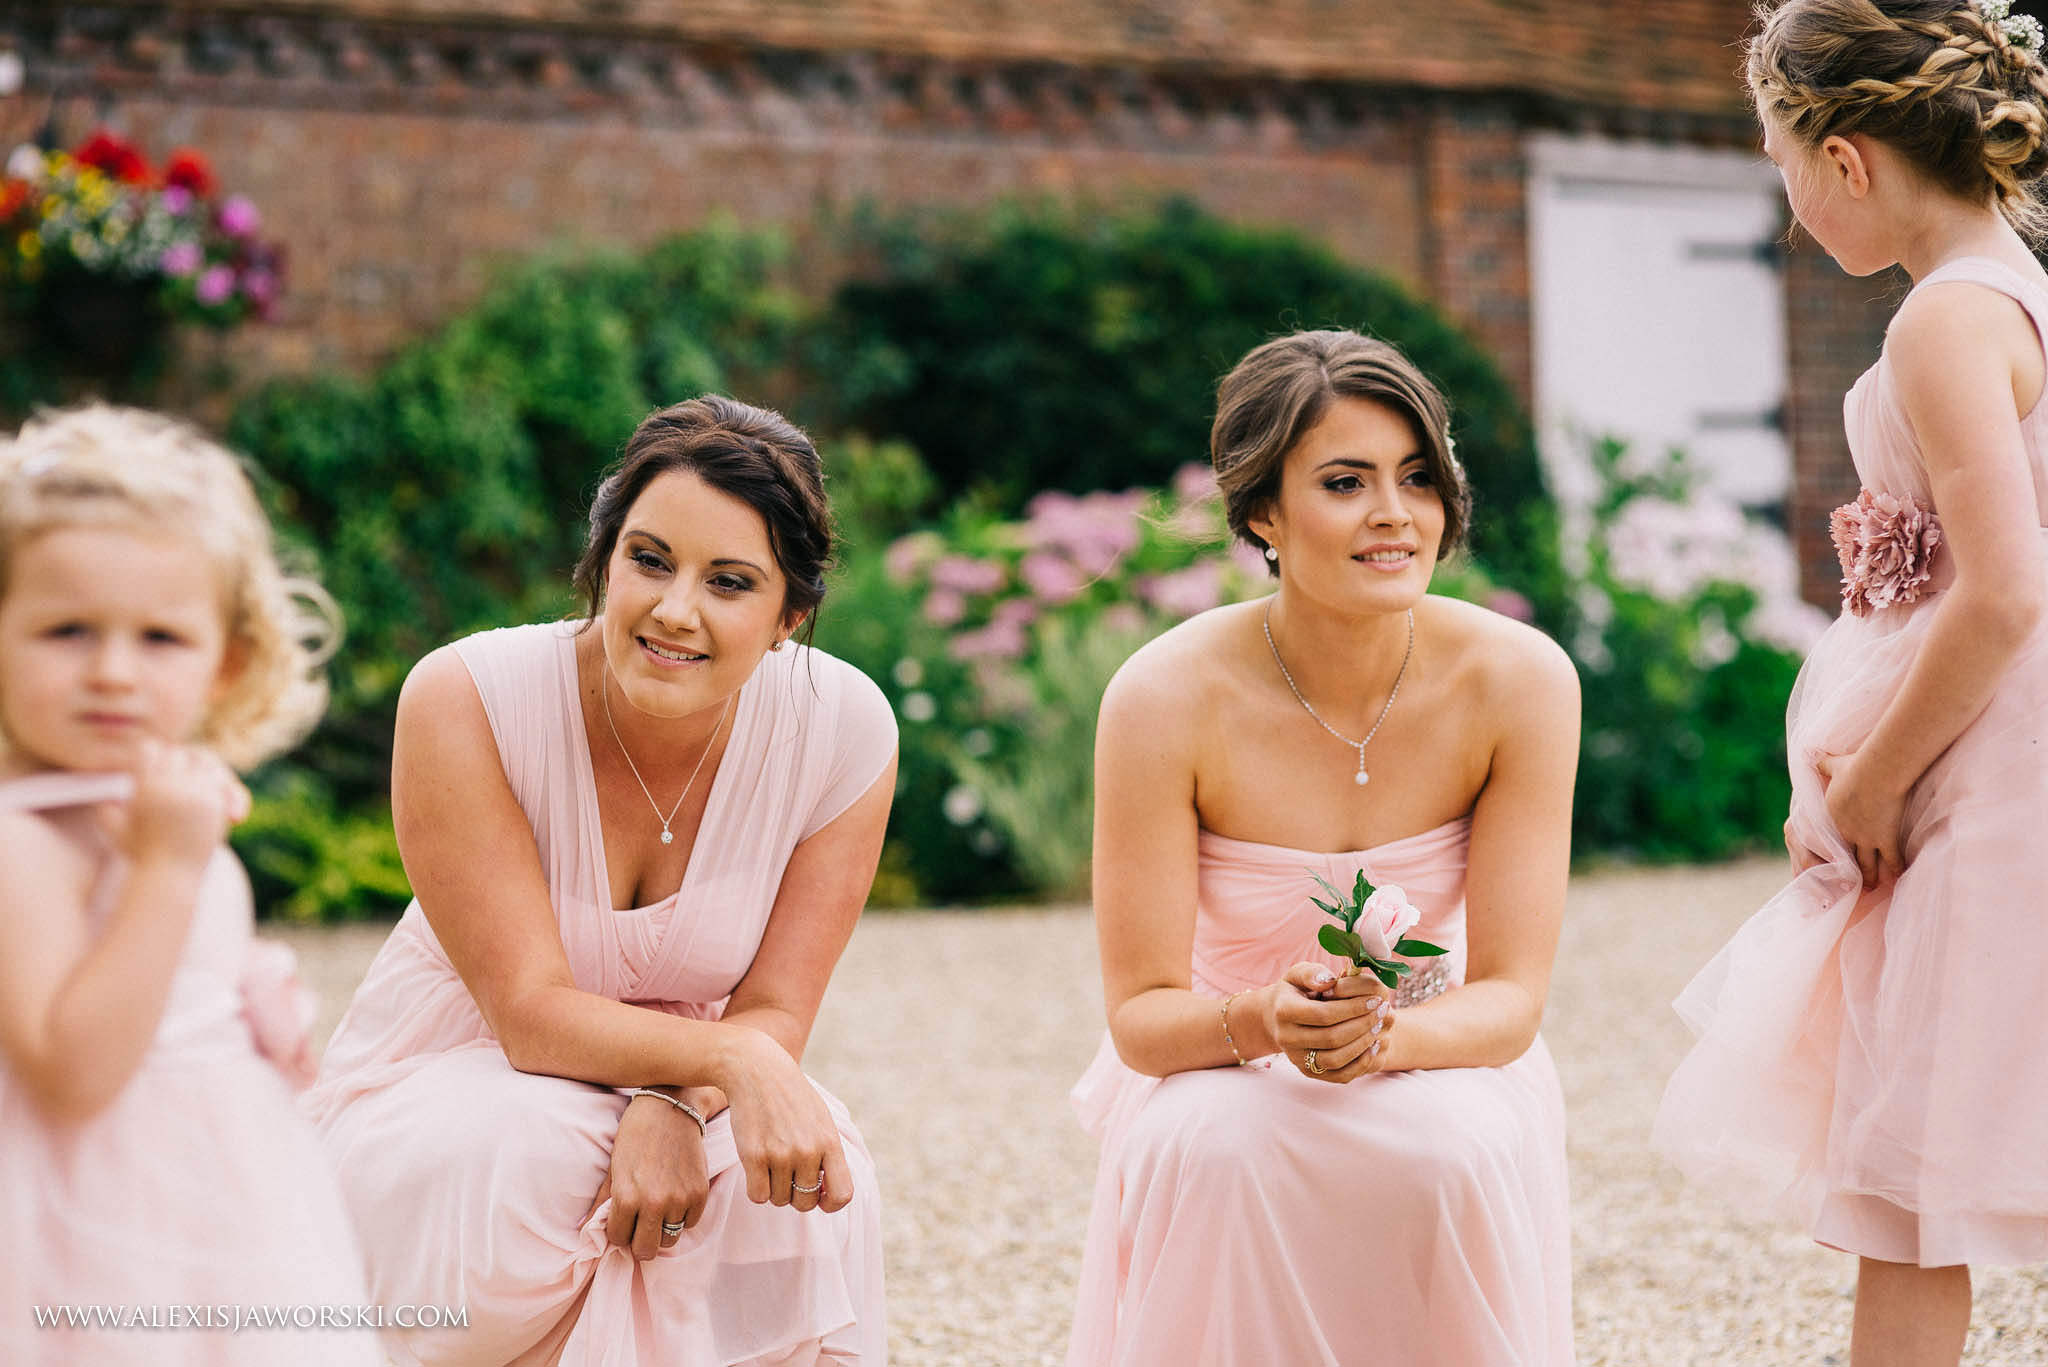 bridesmaids having a chat together